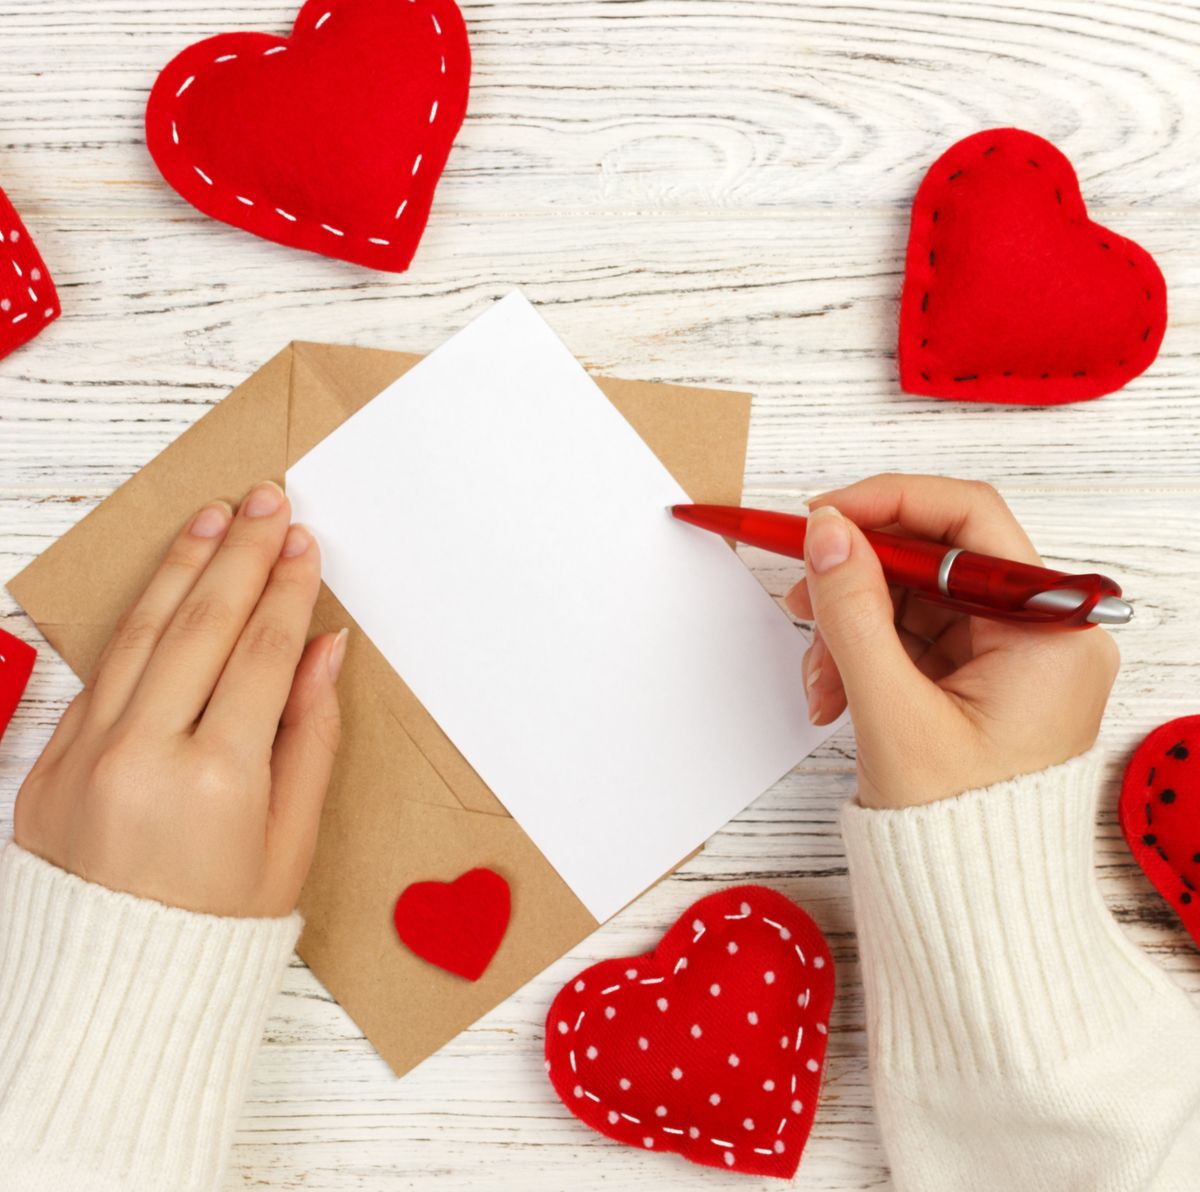 70 Best Valentine's Day Wishes - Messages to Write in a V-Day Card